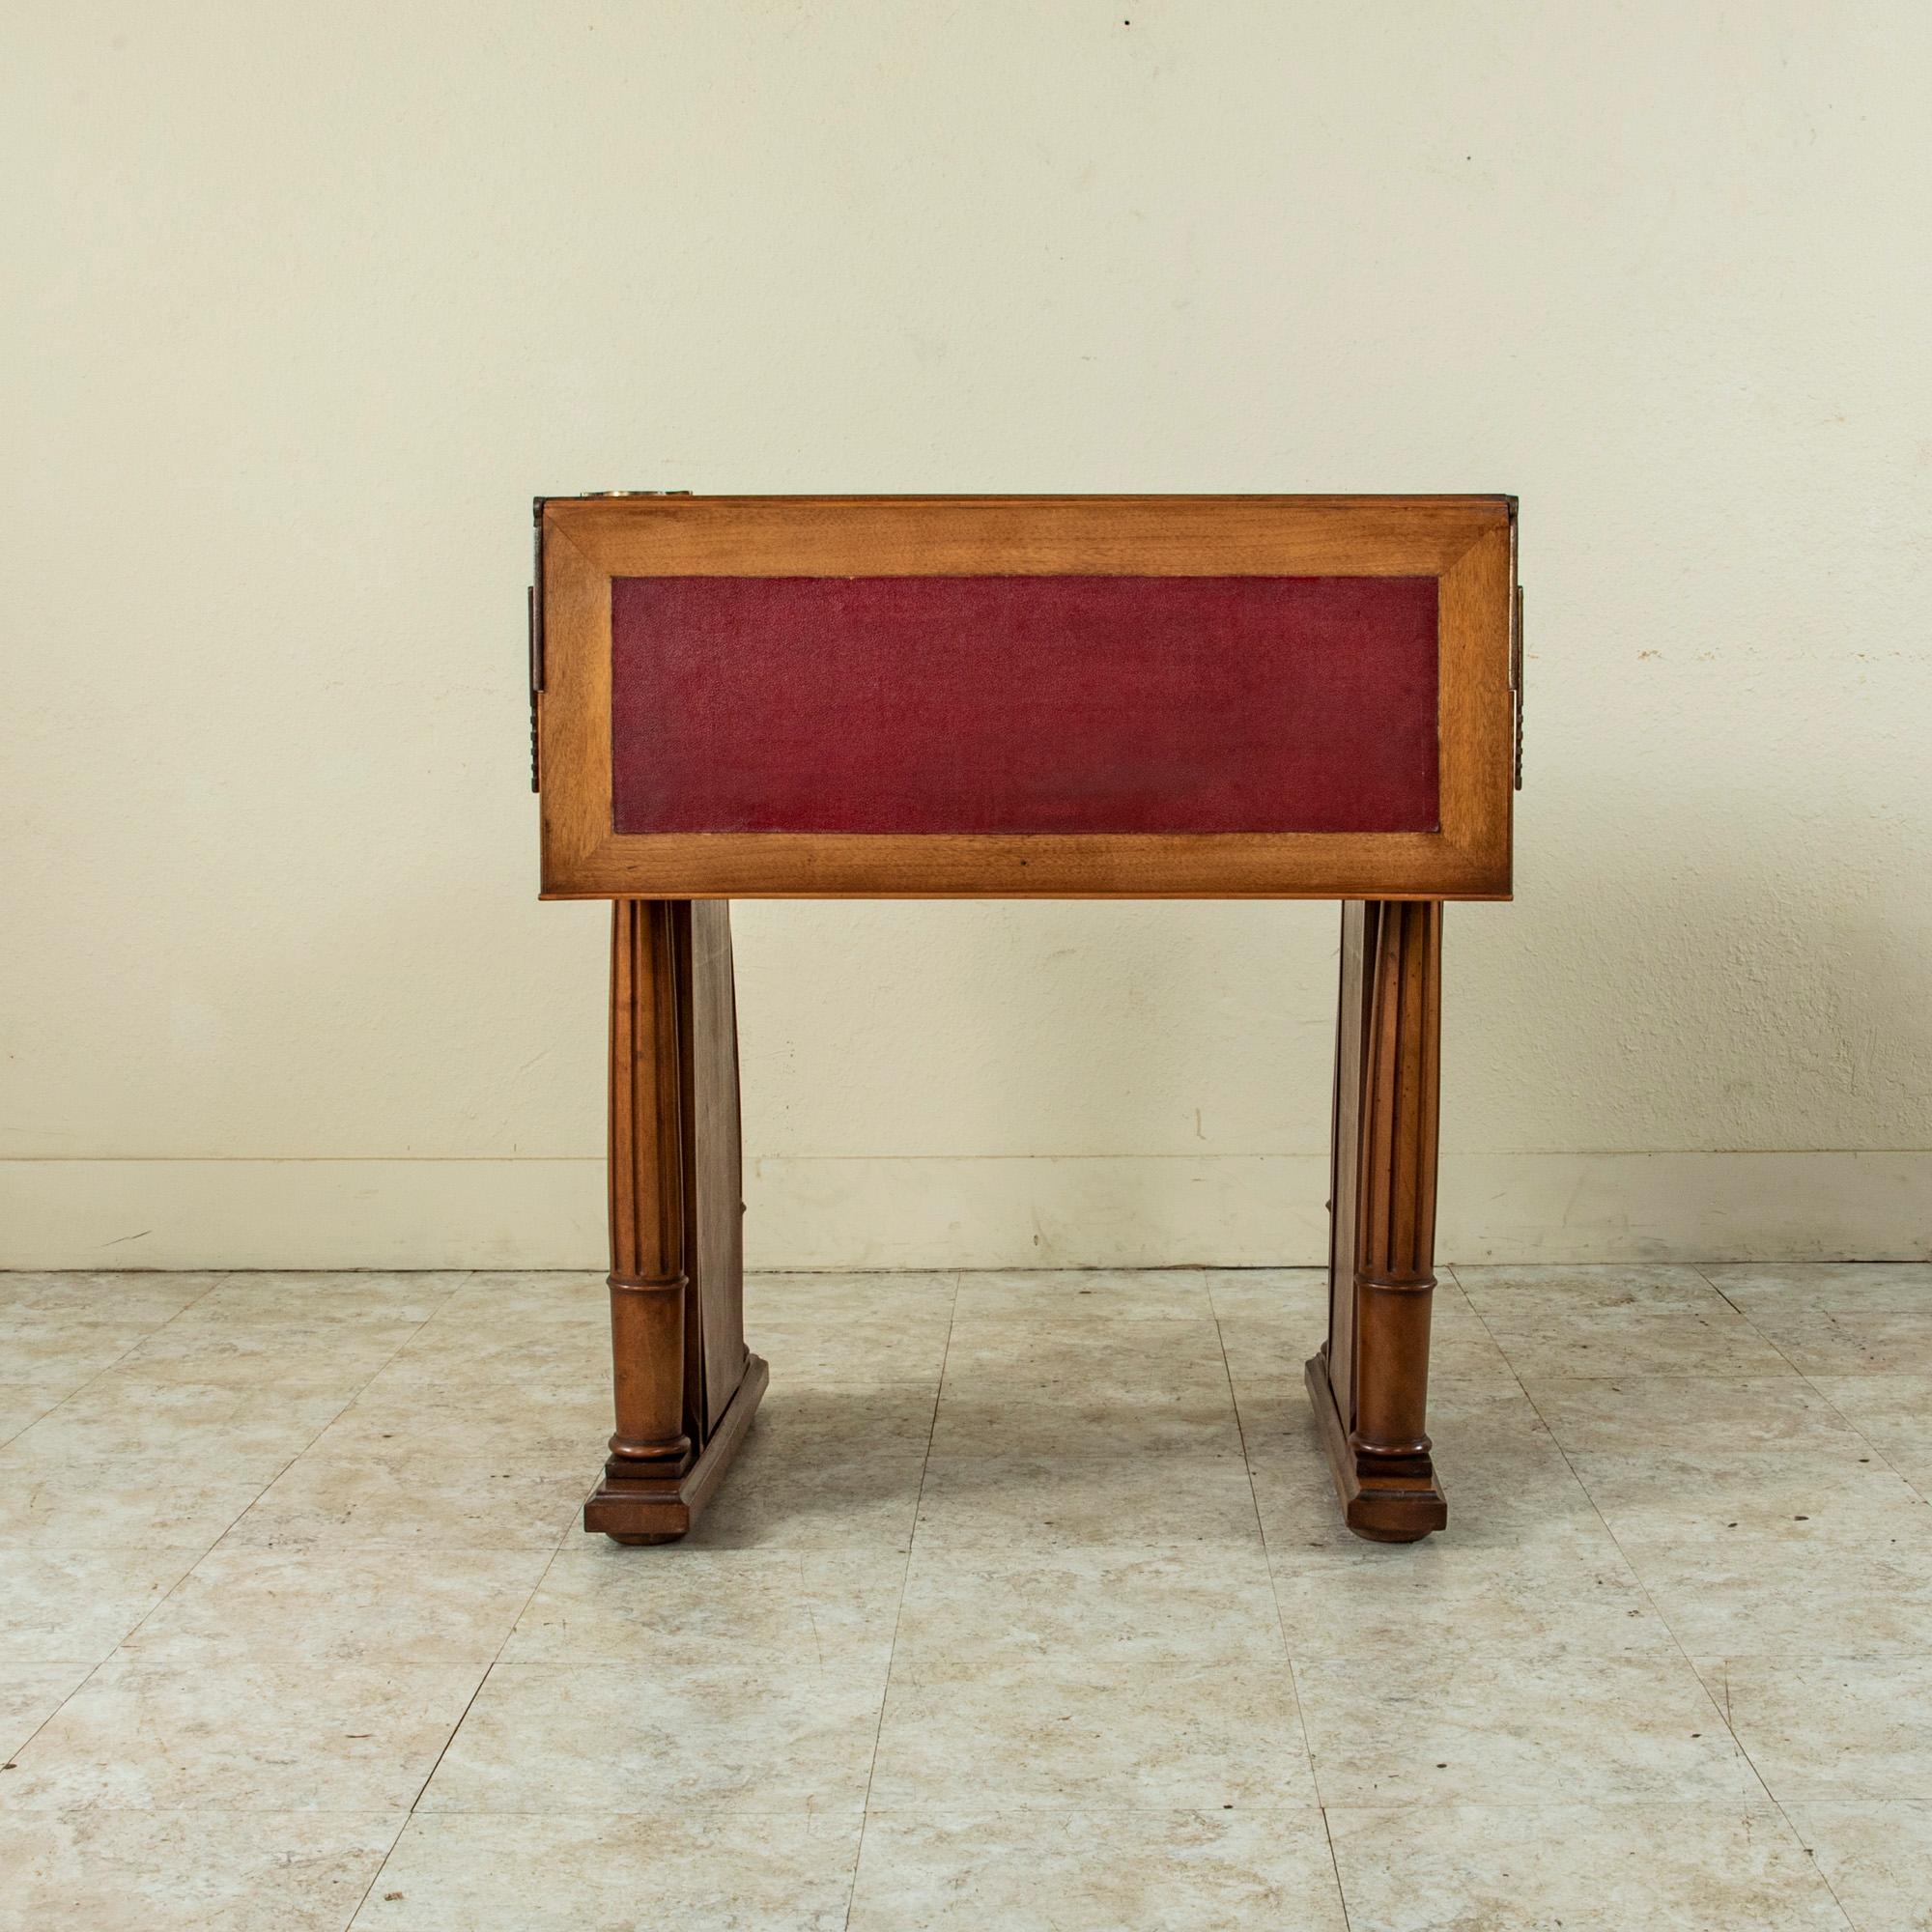 Leather Late 19th Century French Walnut Adjustable Feret Architect's Desk, Standing Desk